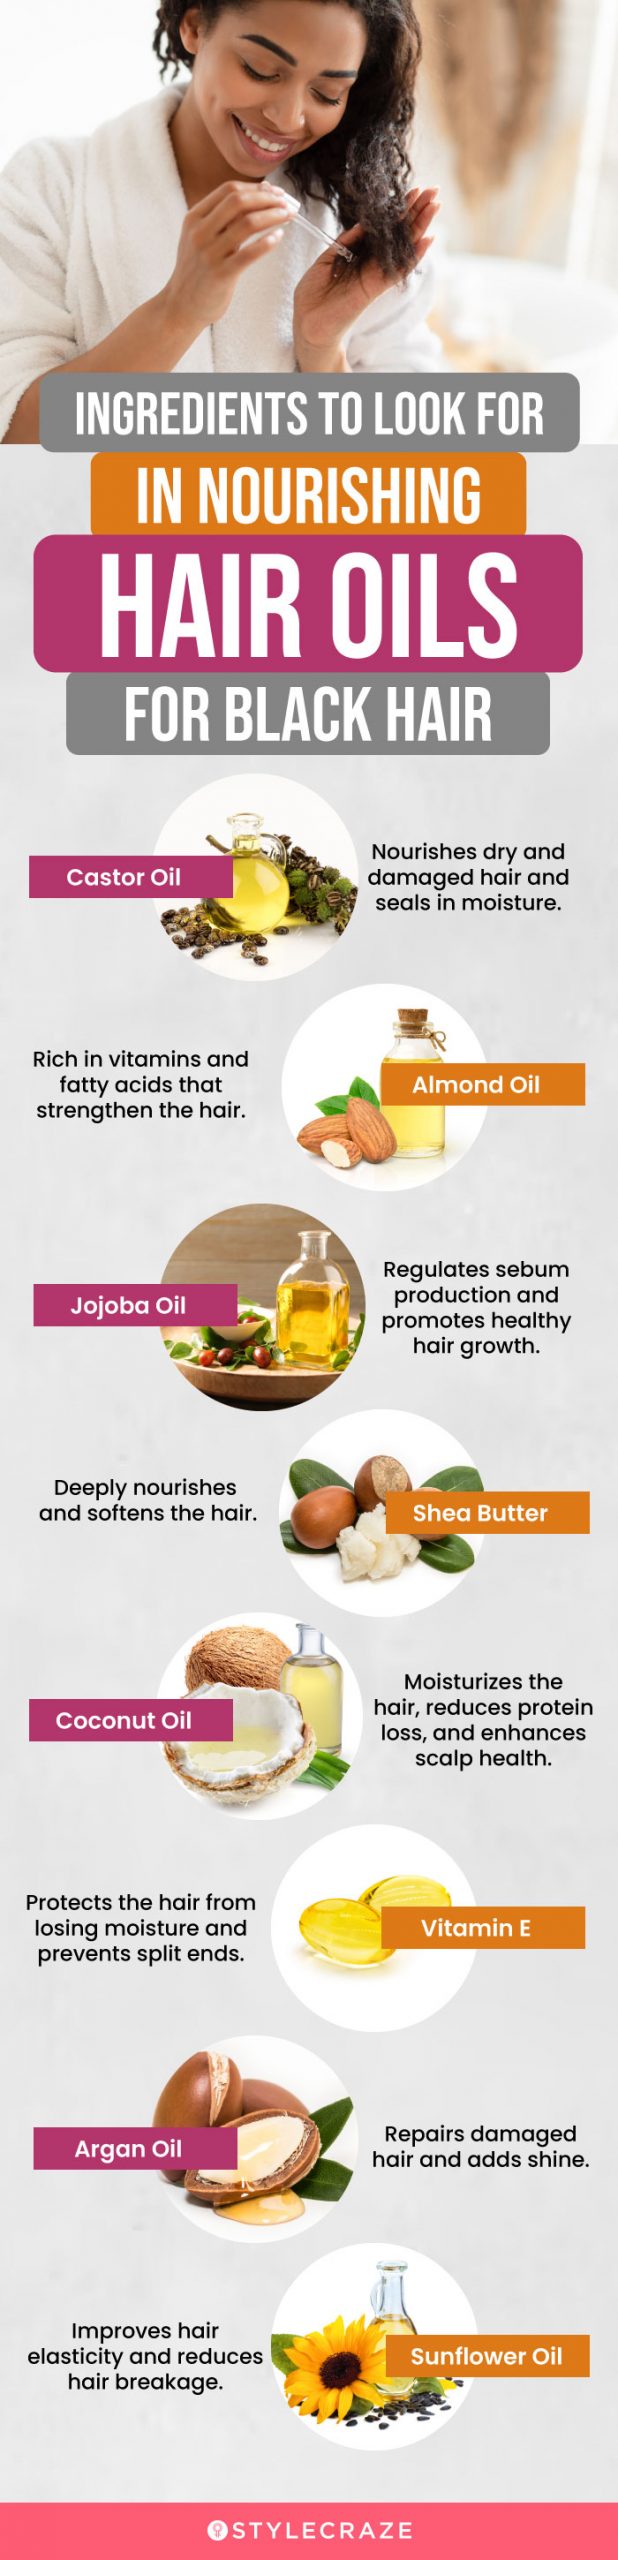 Ingredients To Look For Hair Oils For Black Hair (infographic)